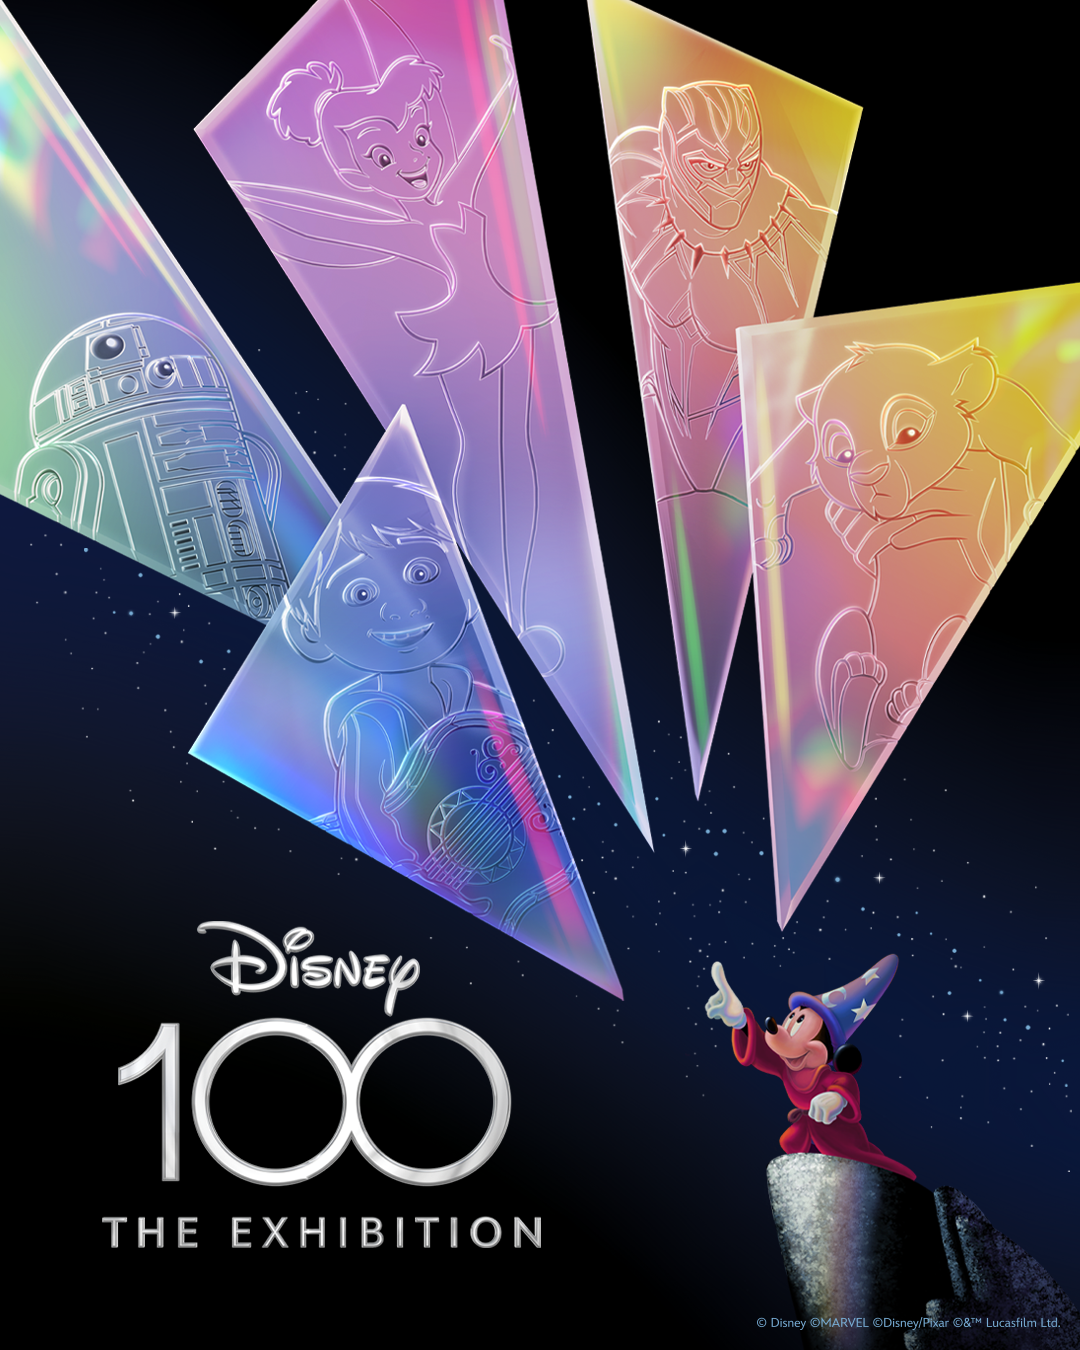 Disney 100: The Exhibition starts a World Tour in 2023.